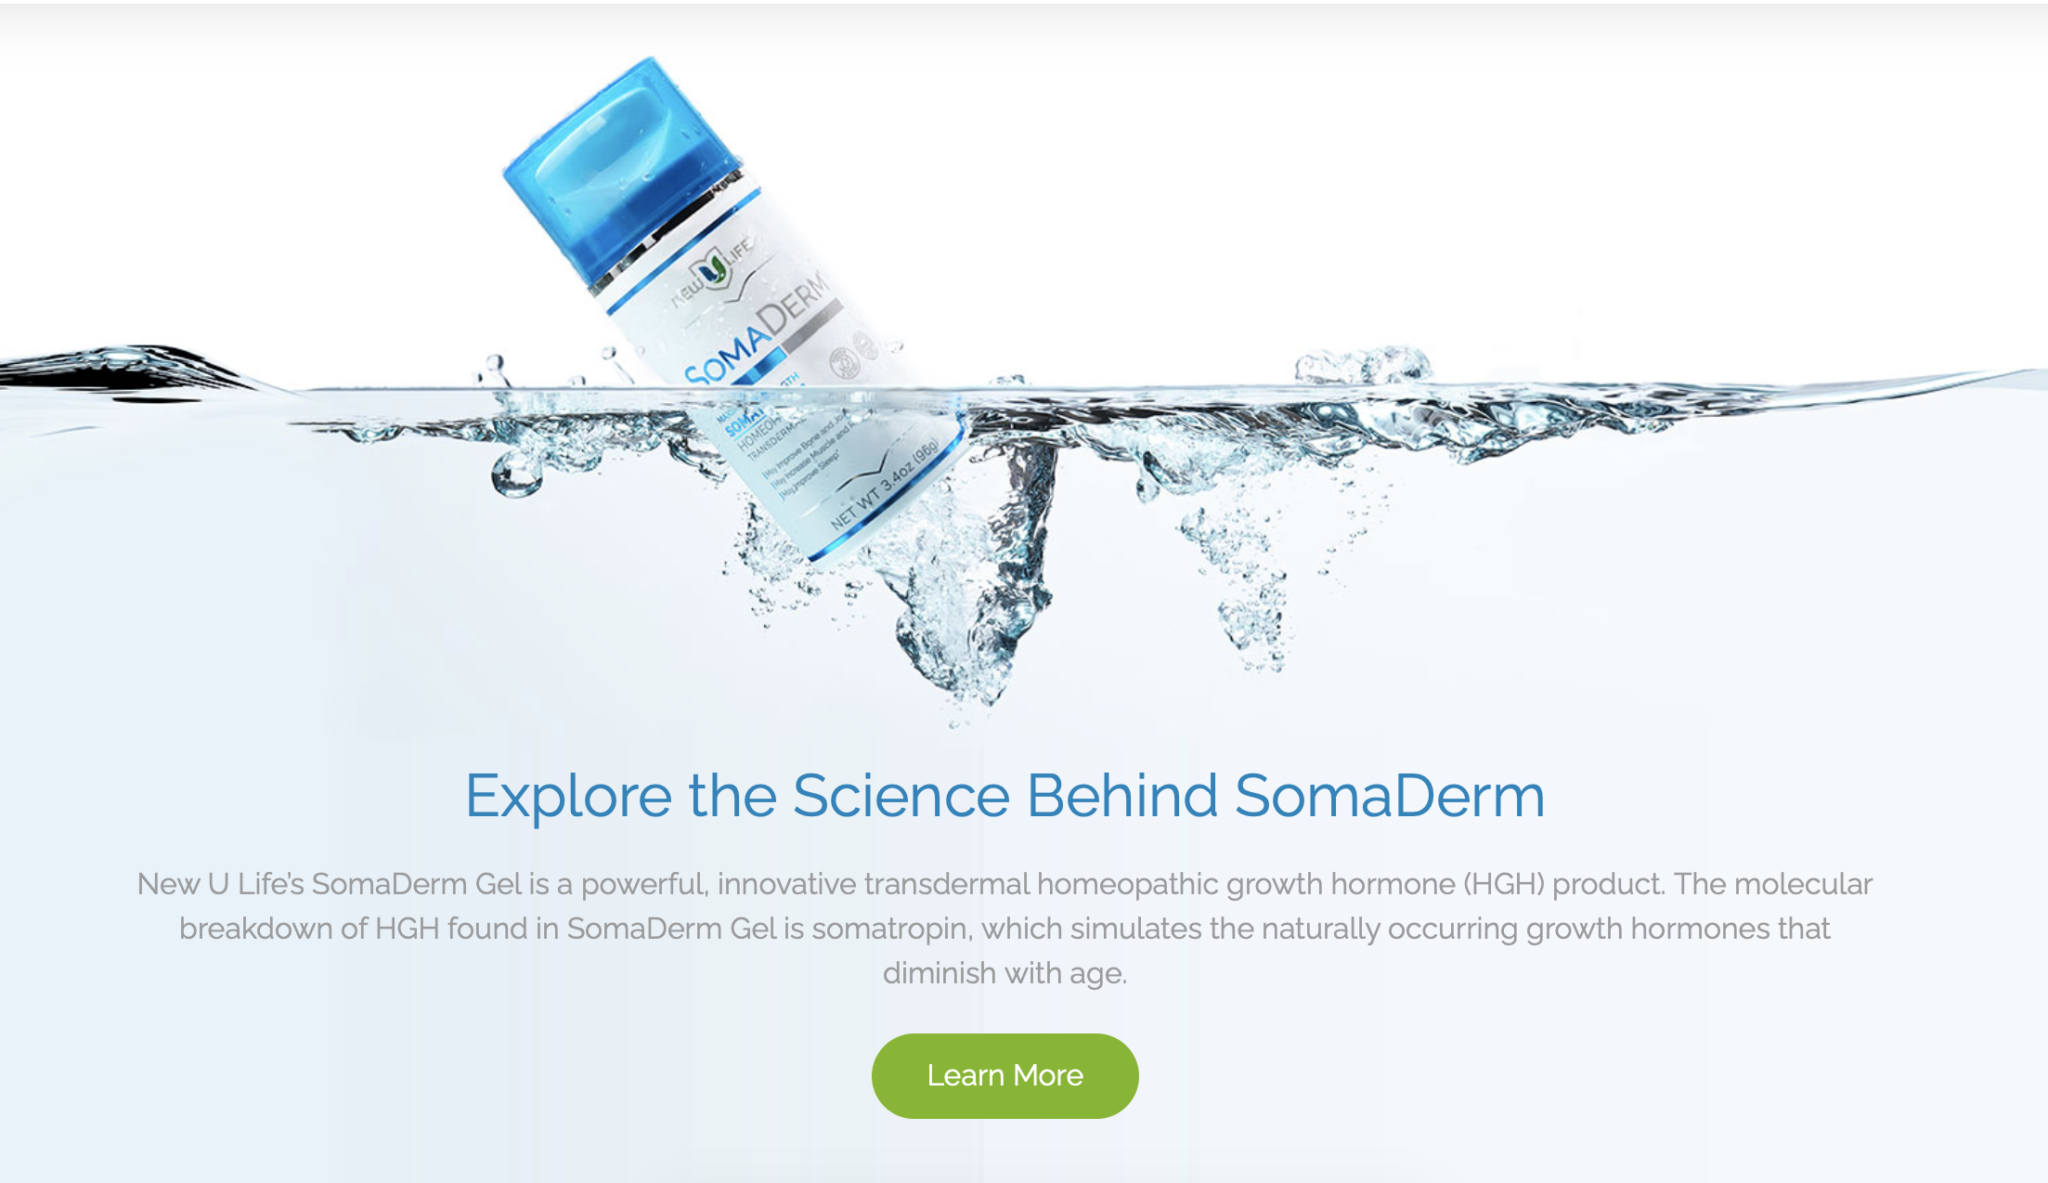 Will New U Life Finally Admit SomaDerm Doesn’t Contain HGH? - Truth in